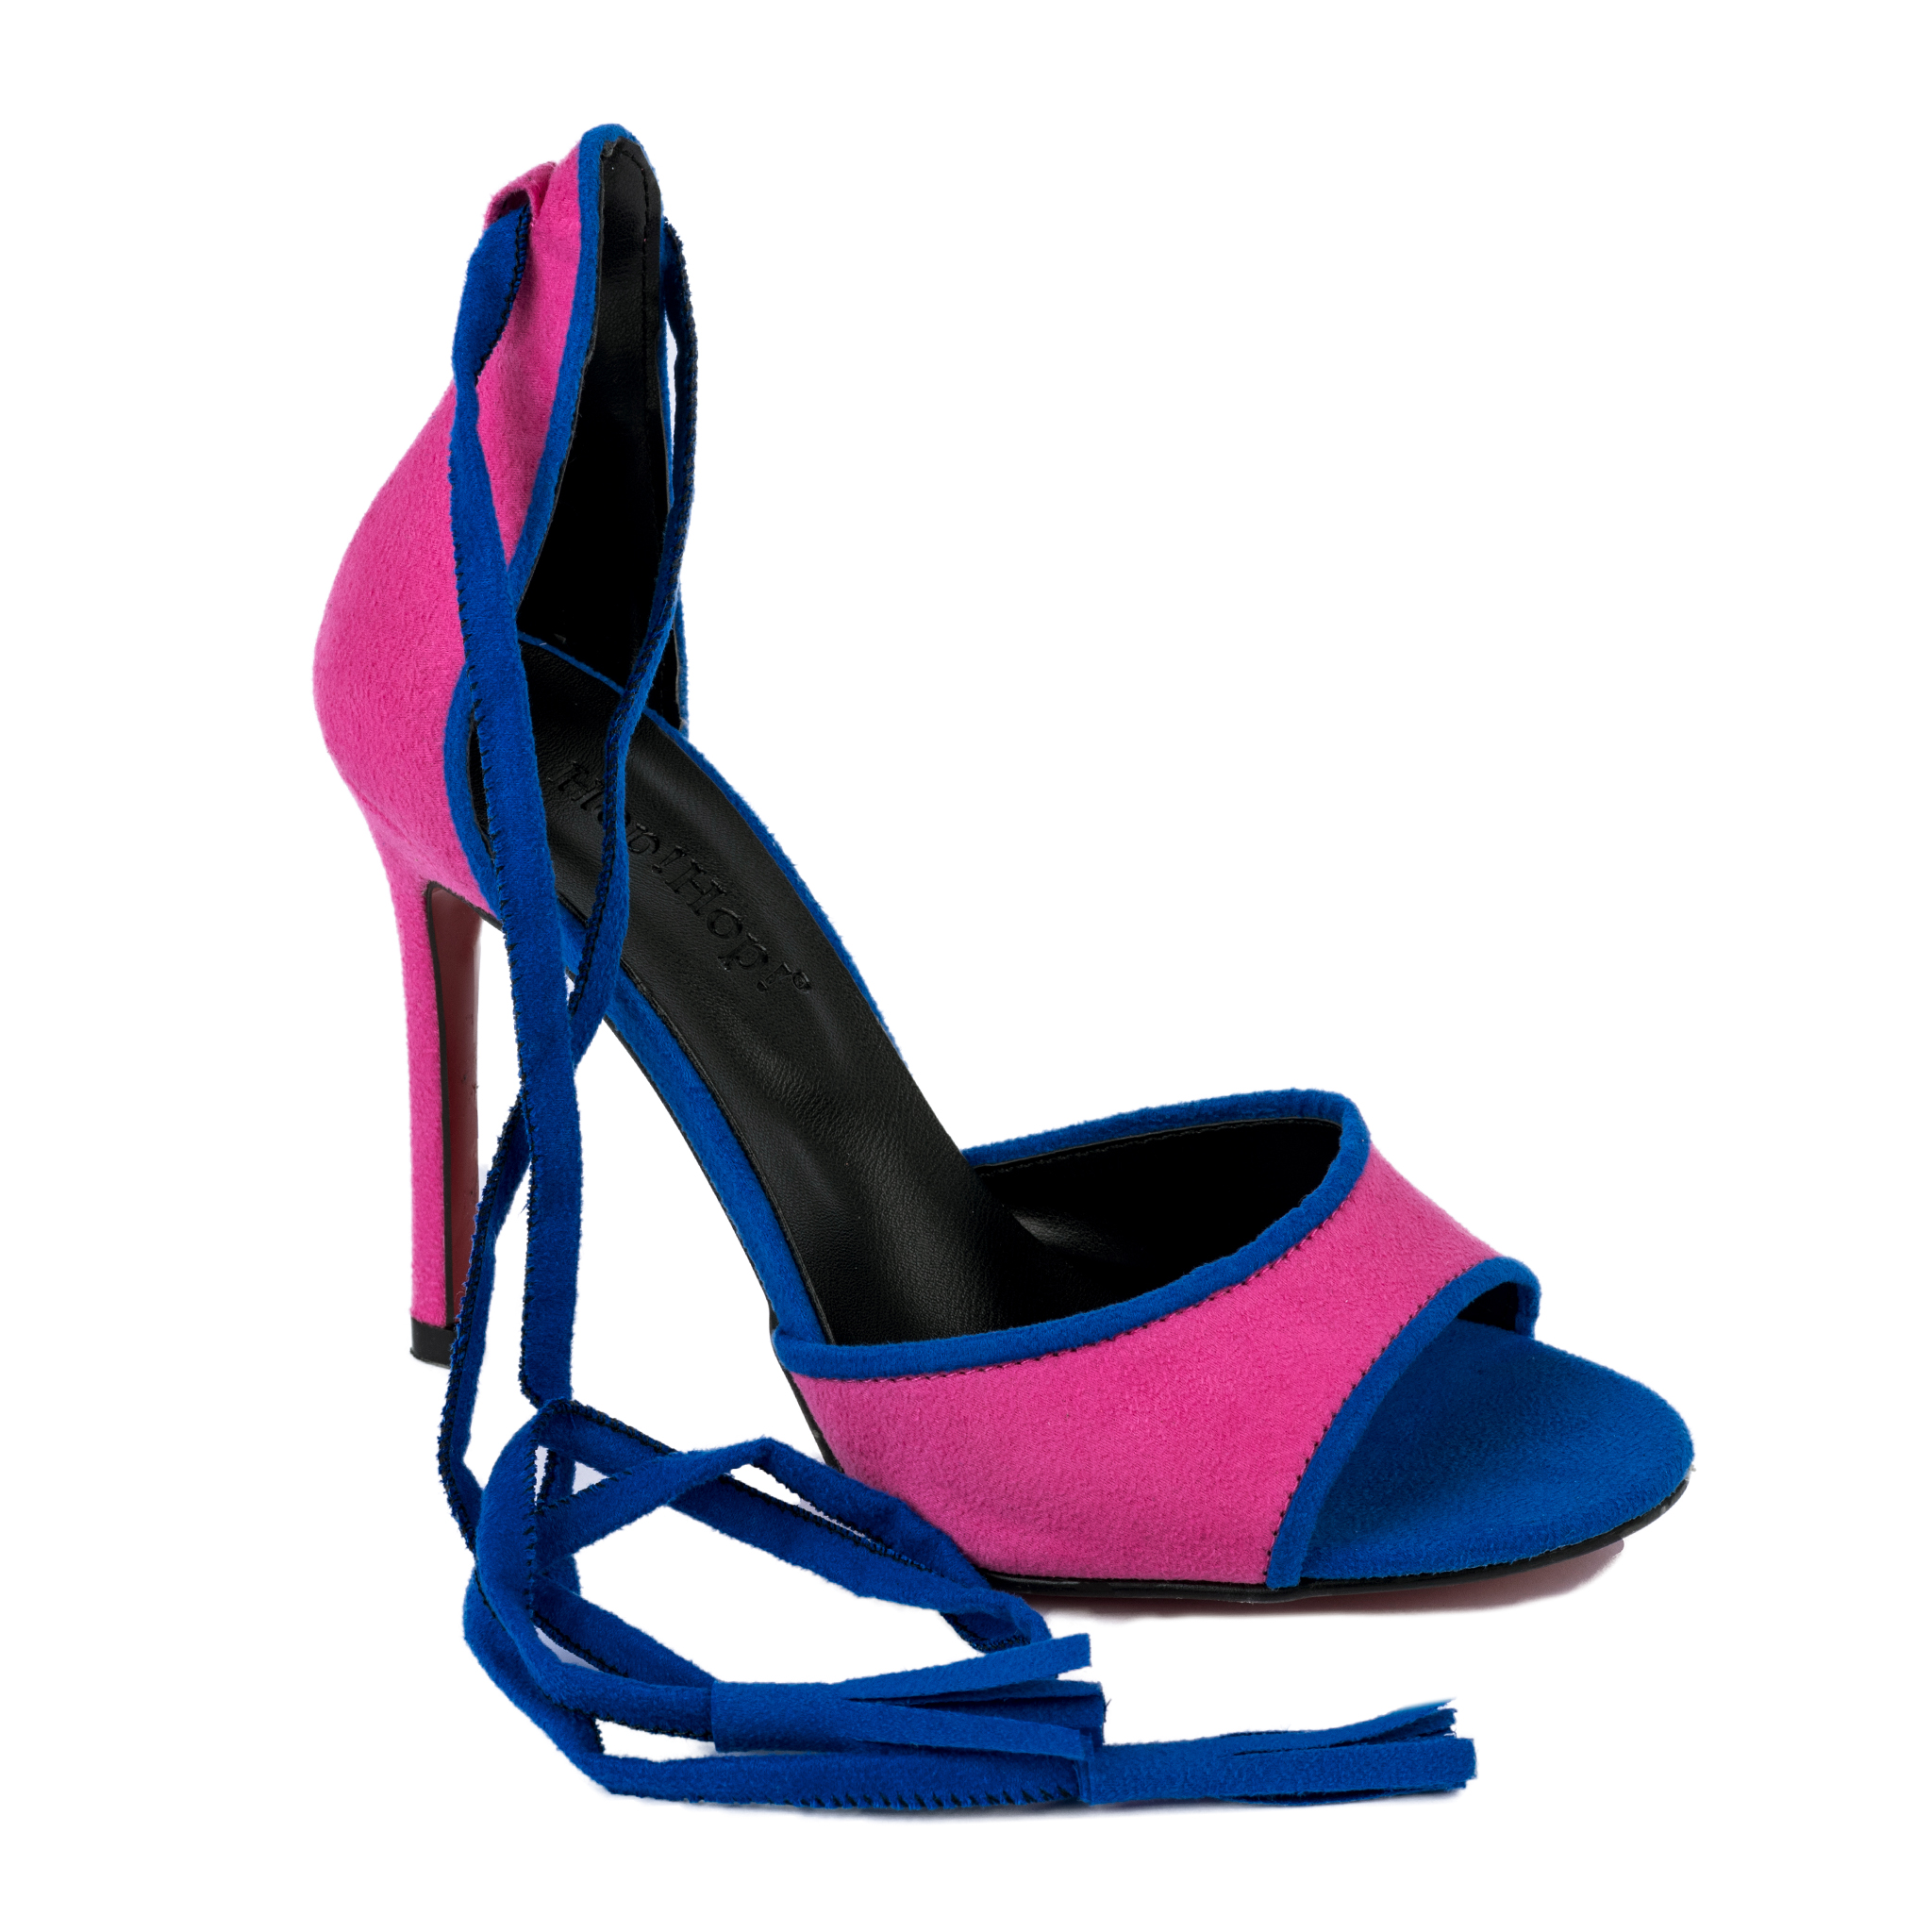 VELOUR LACE UP THIN HEEL SANDALS - PINK/BLUE